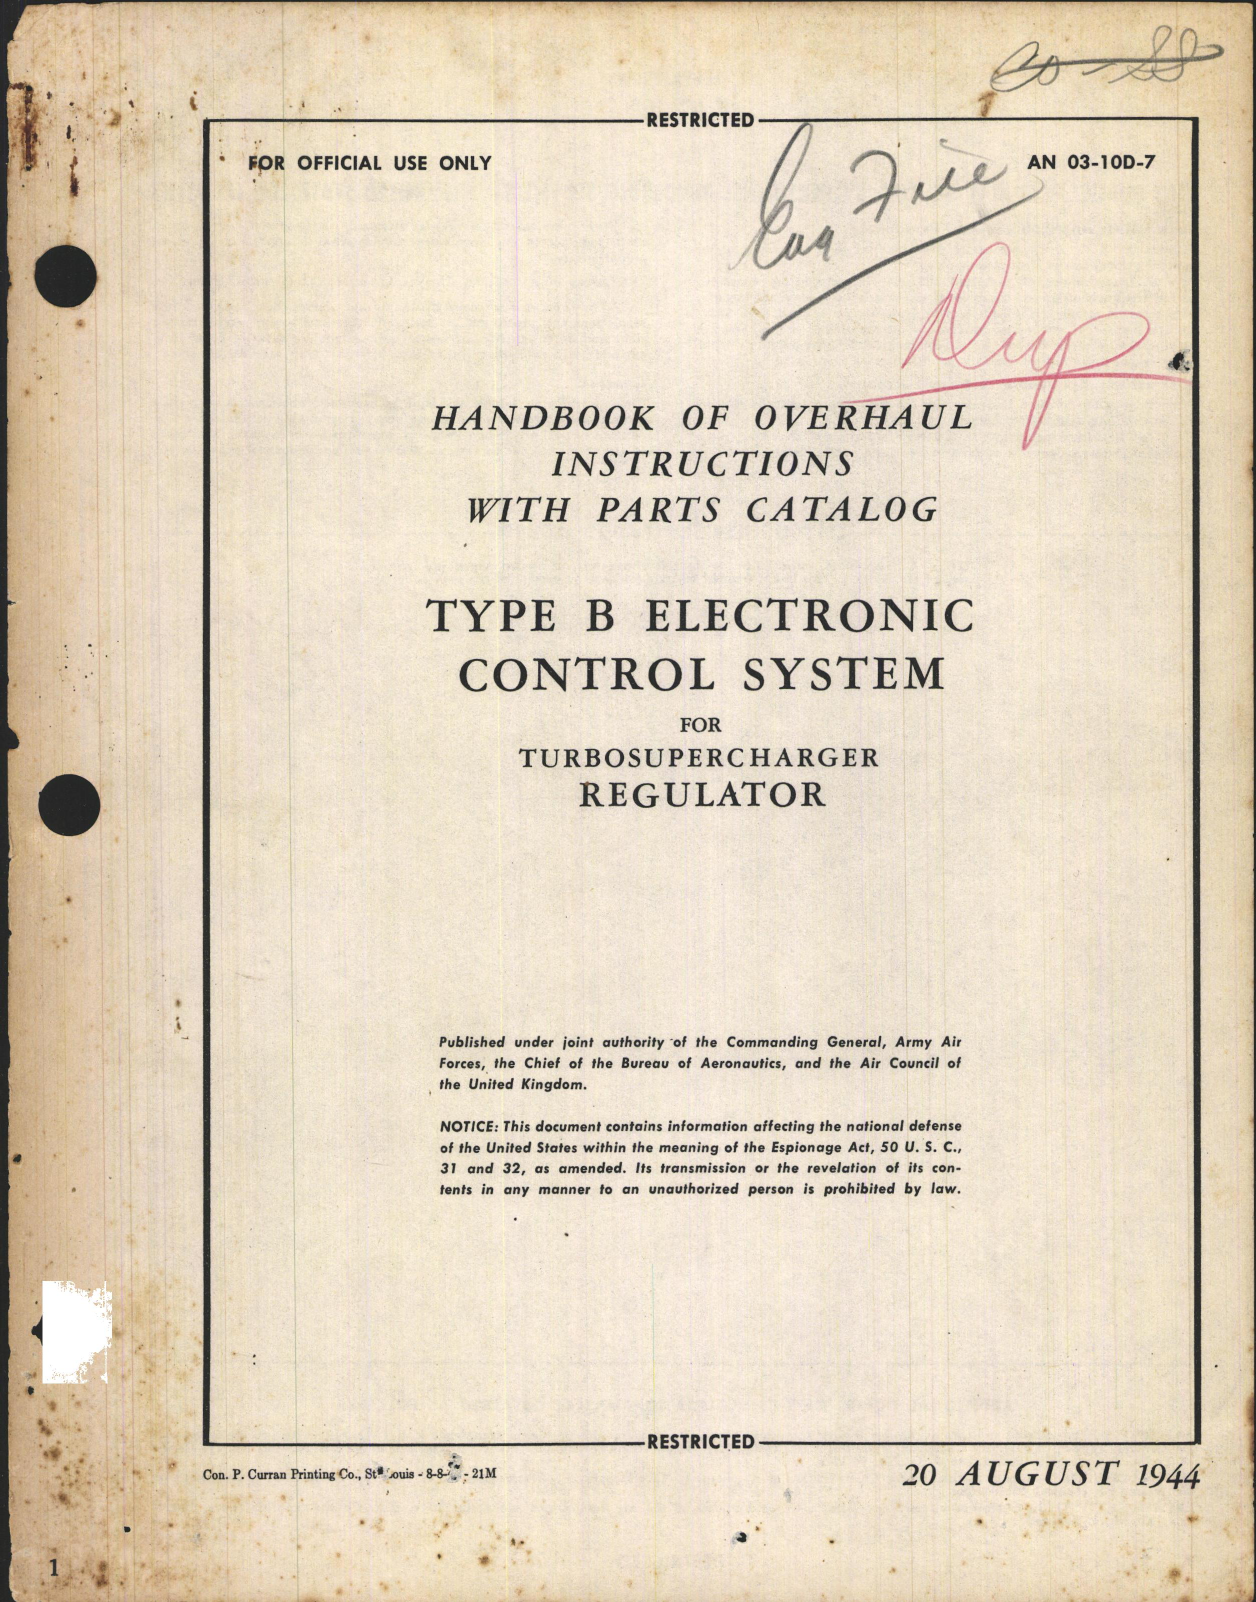 Sample page 1 from AirCorps Library document: Overhaul Instructions with Parts Catalog for Type B Electronic Control System (Turbosupercharger Regulator)